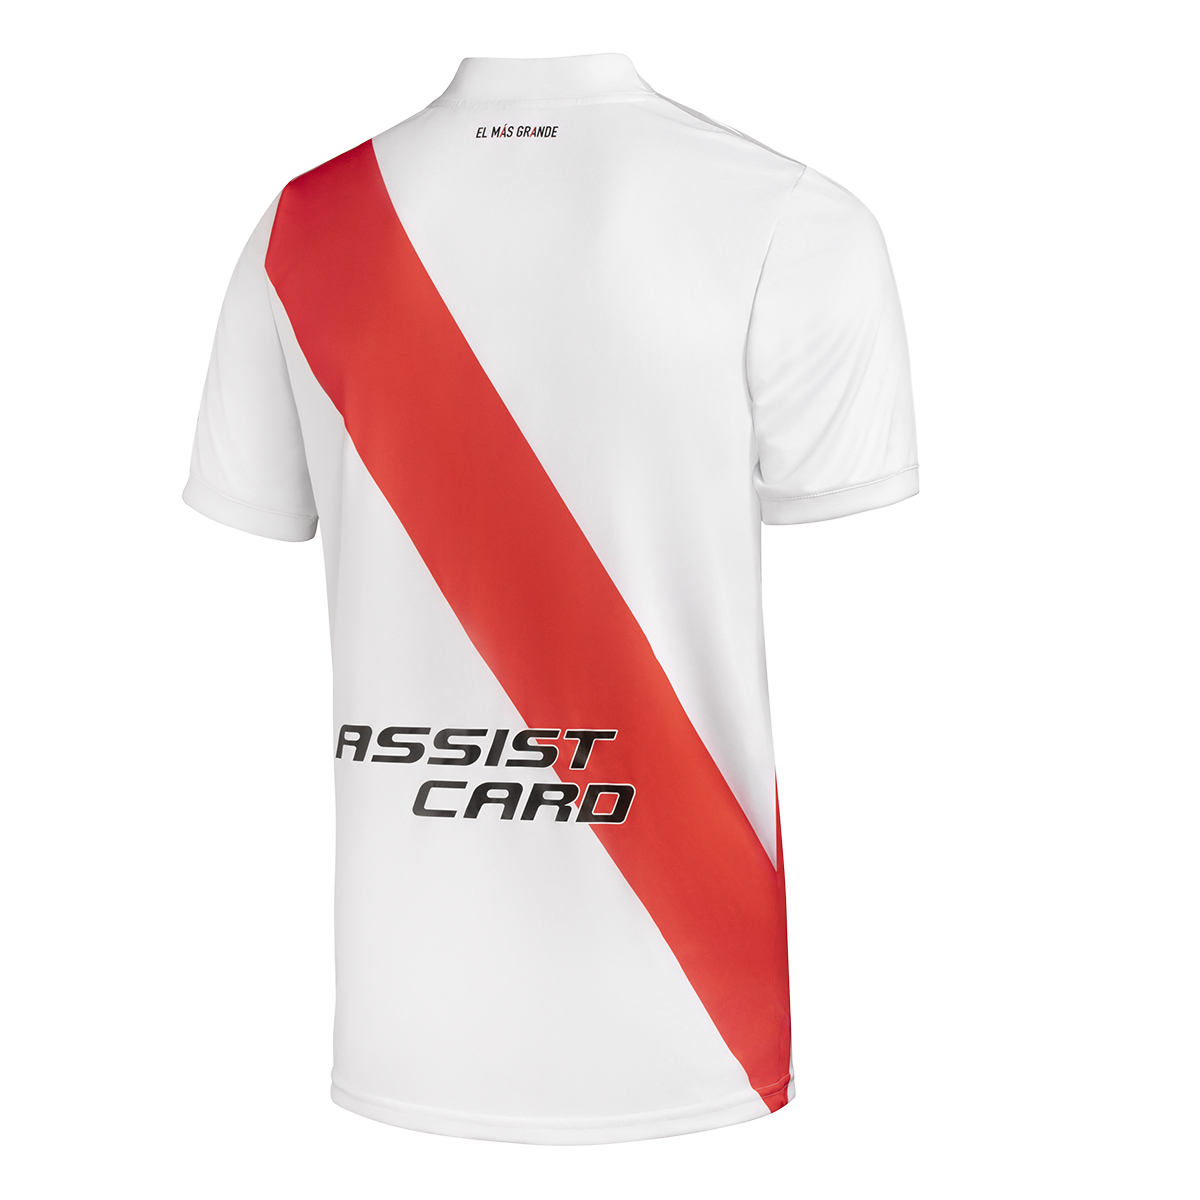 Camiseta adidas River Plate Home 20/21,  image number null